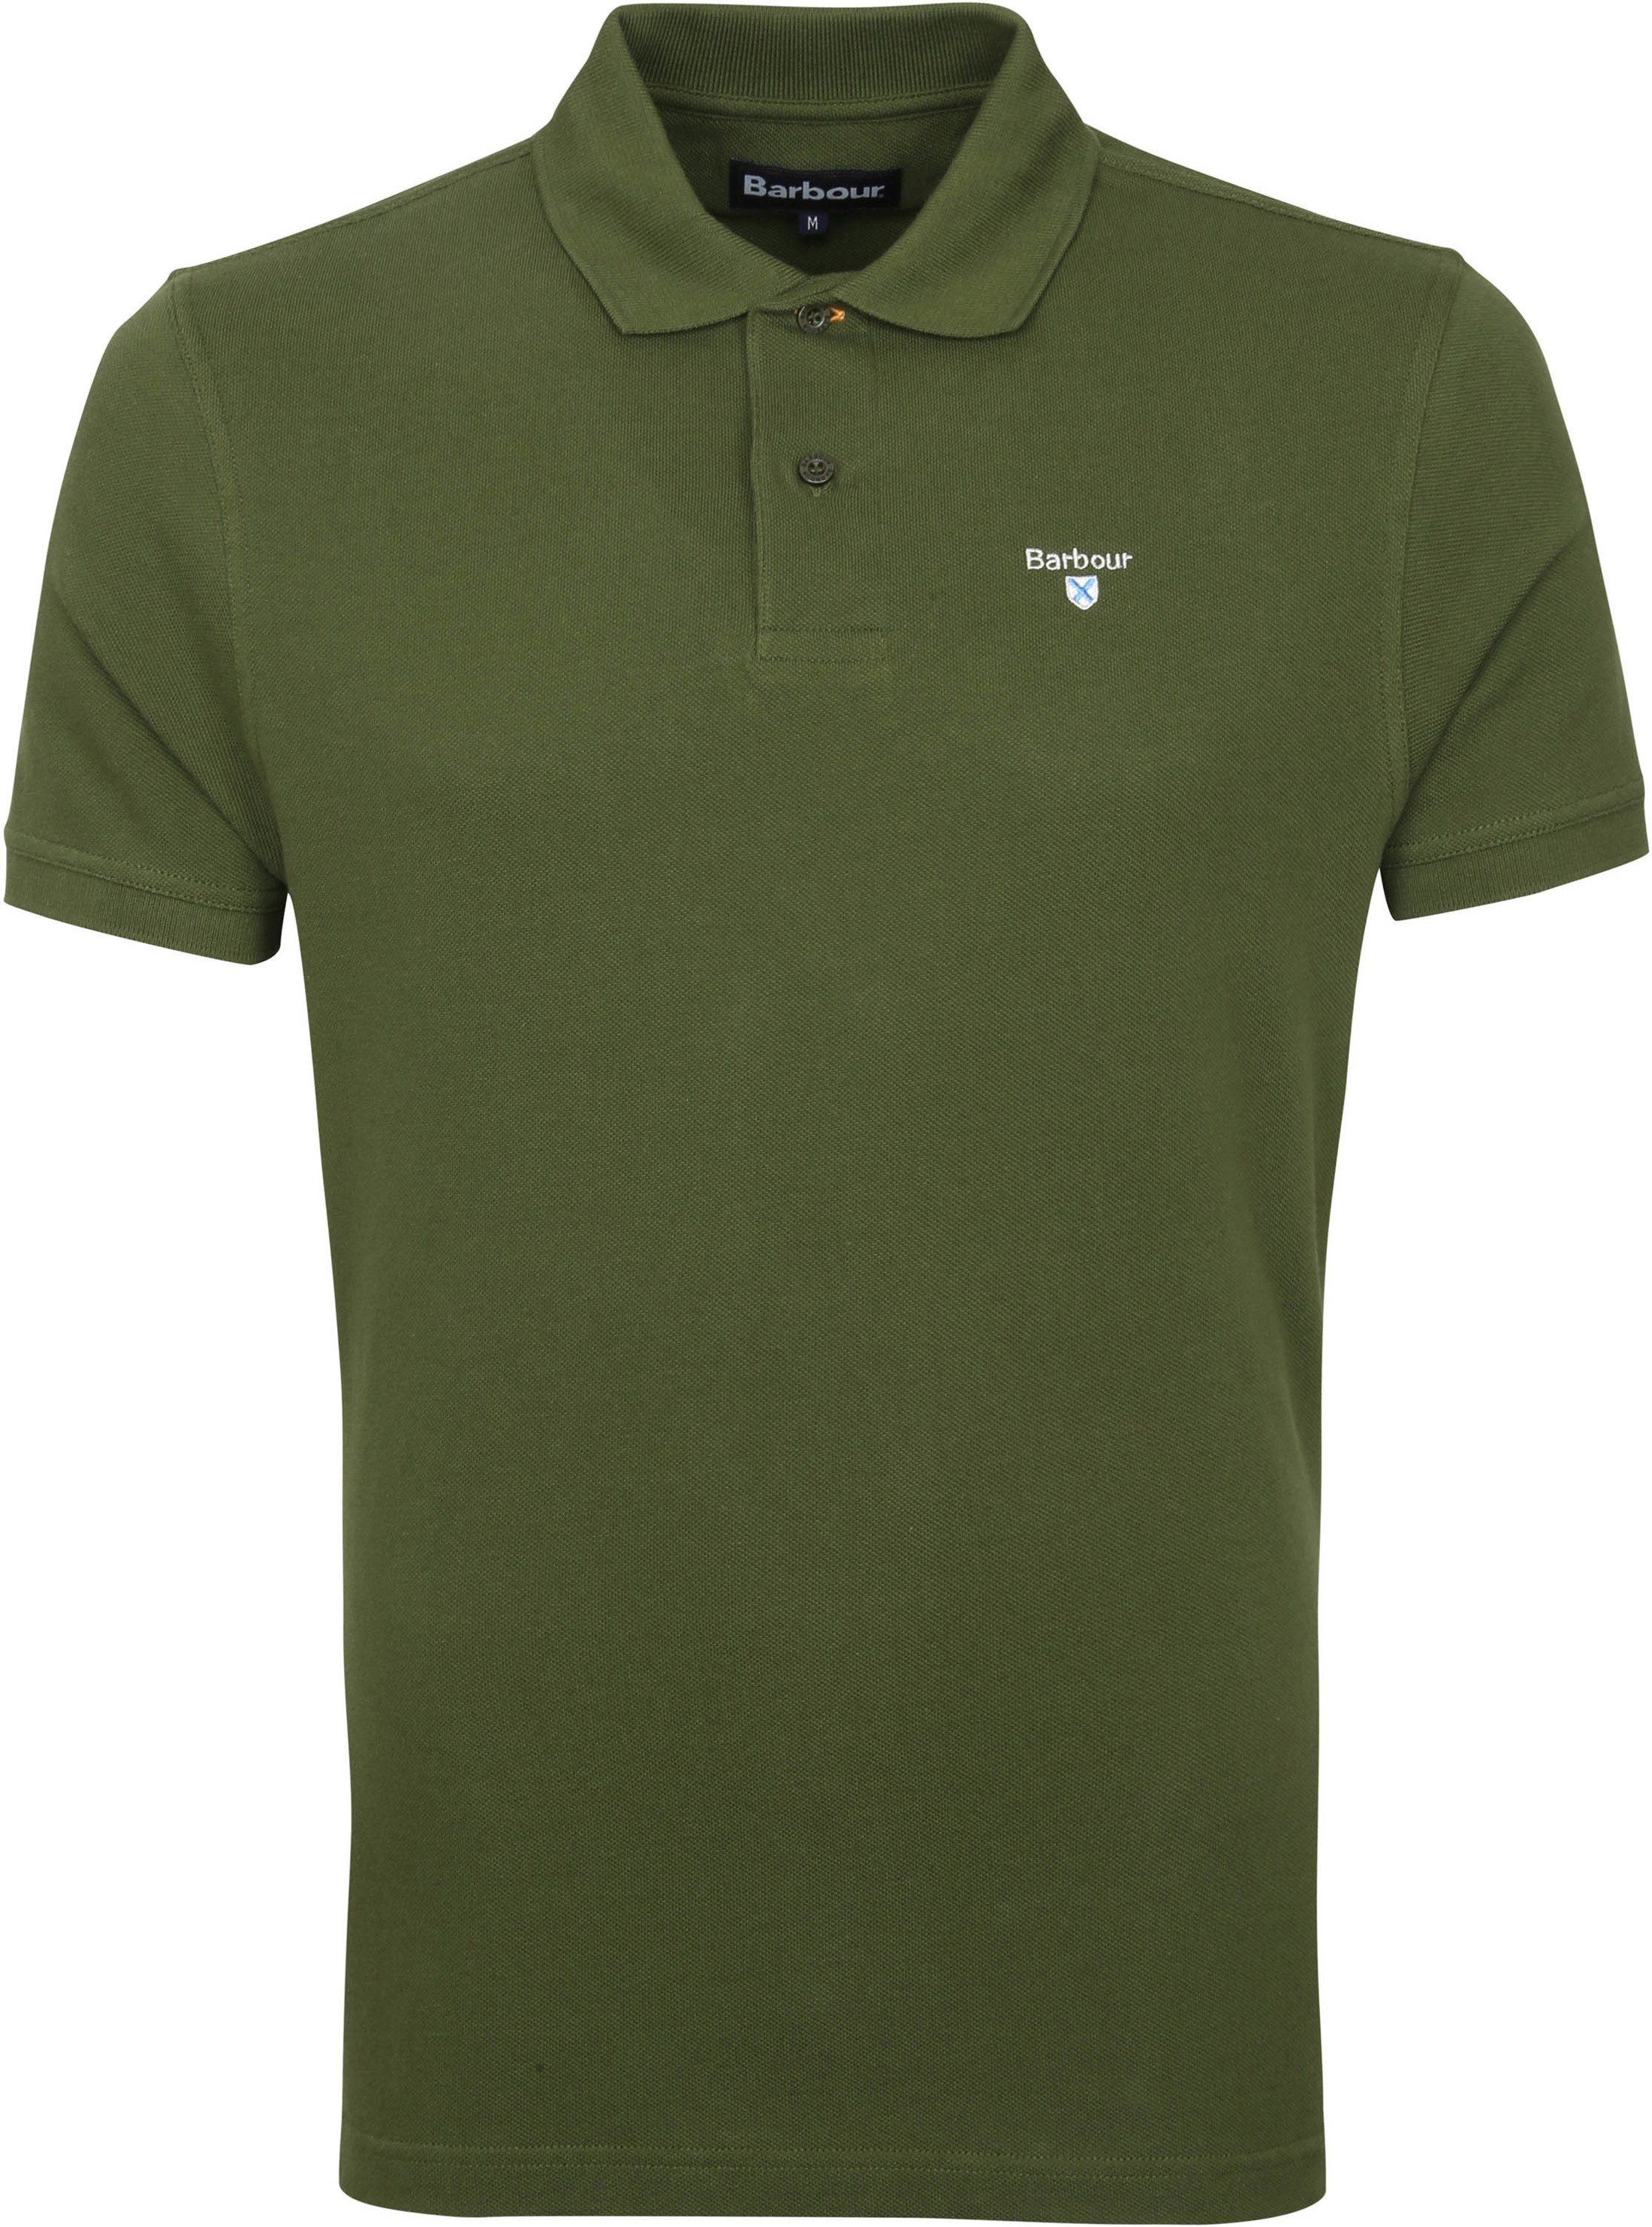 Barbour Basic Pique Polo Shirt Army Green Dark Green size L